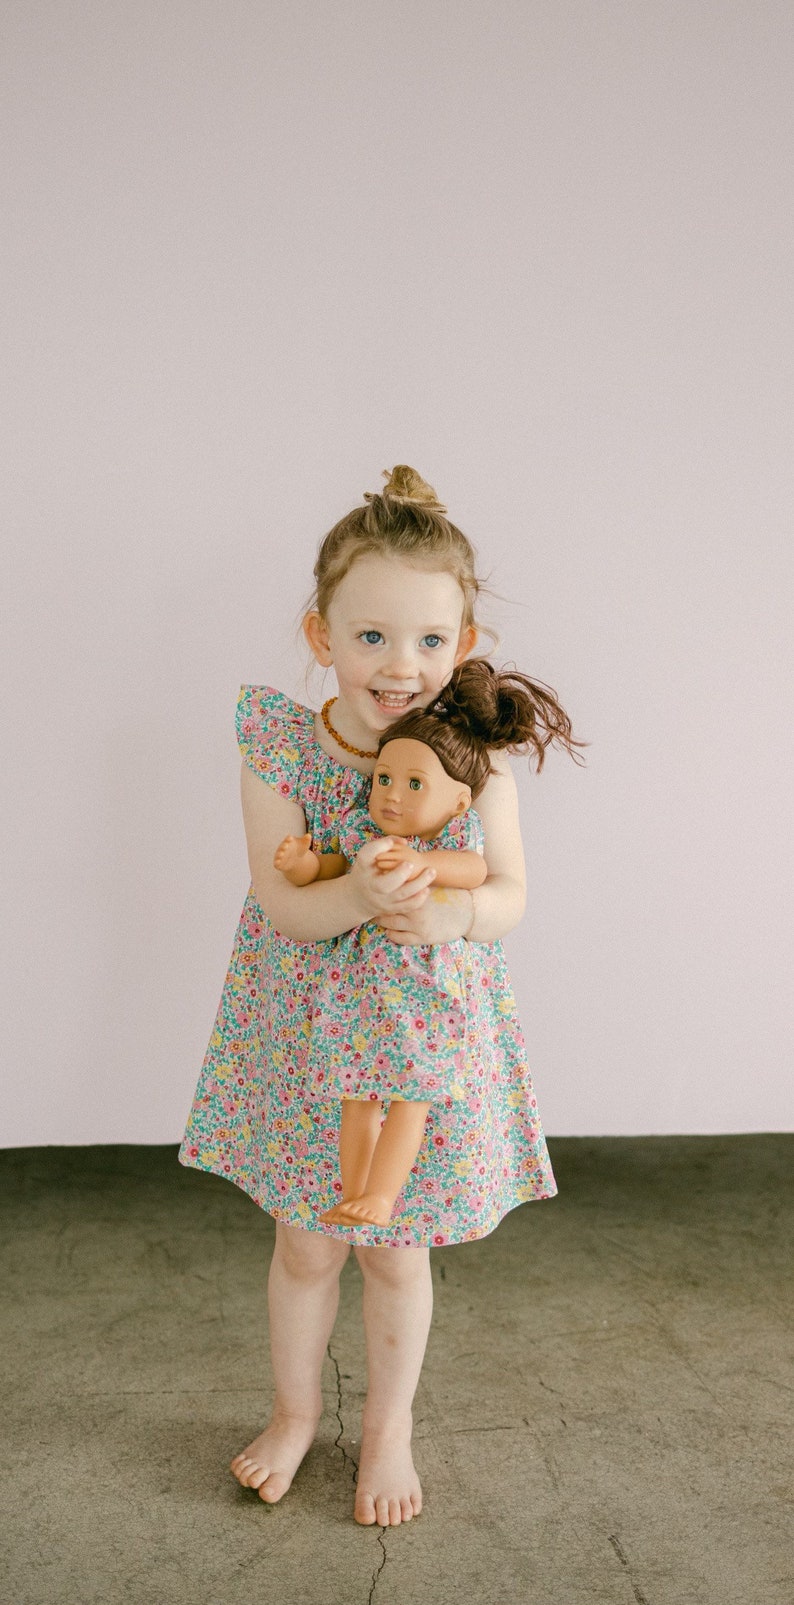 girl and doll matching outfit, doll and me dress, girl Easter gift, dolly and me, American Girl, Bitty Baby, Our Generation, Valentine's day Arley Garden in G